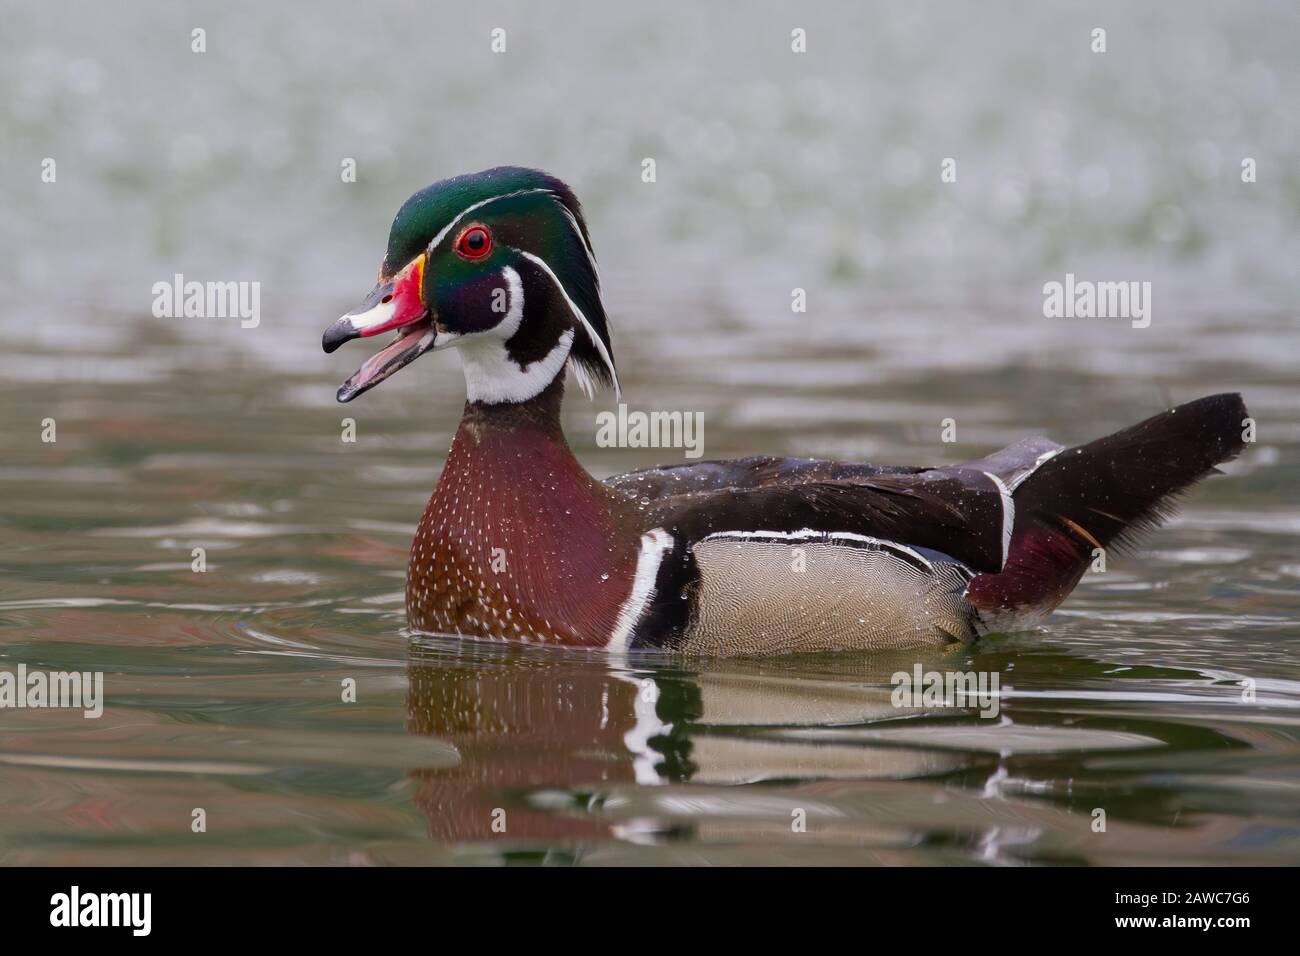 A quacking wood duck Stock Photo